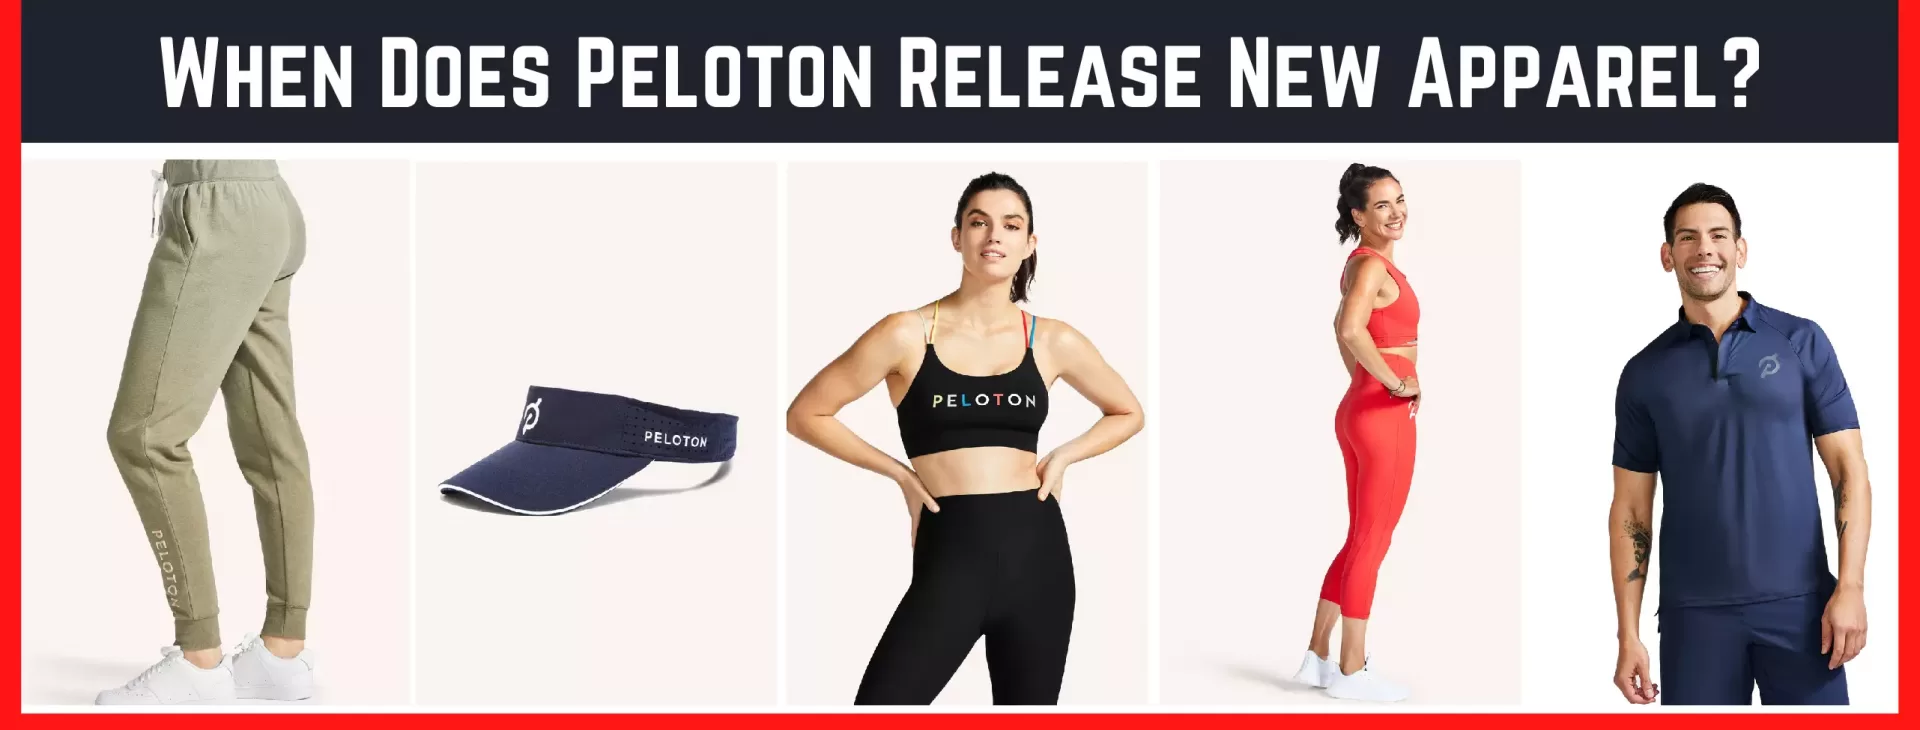 When Does Peloton Release New Apparel